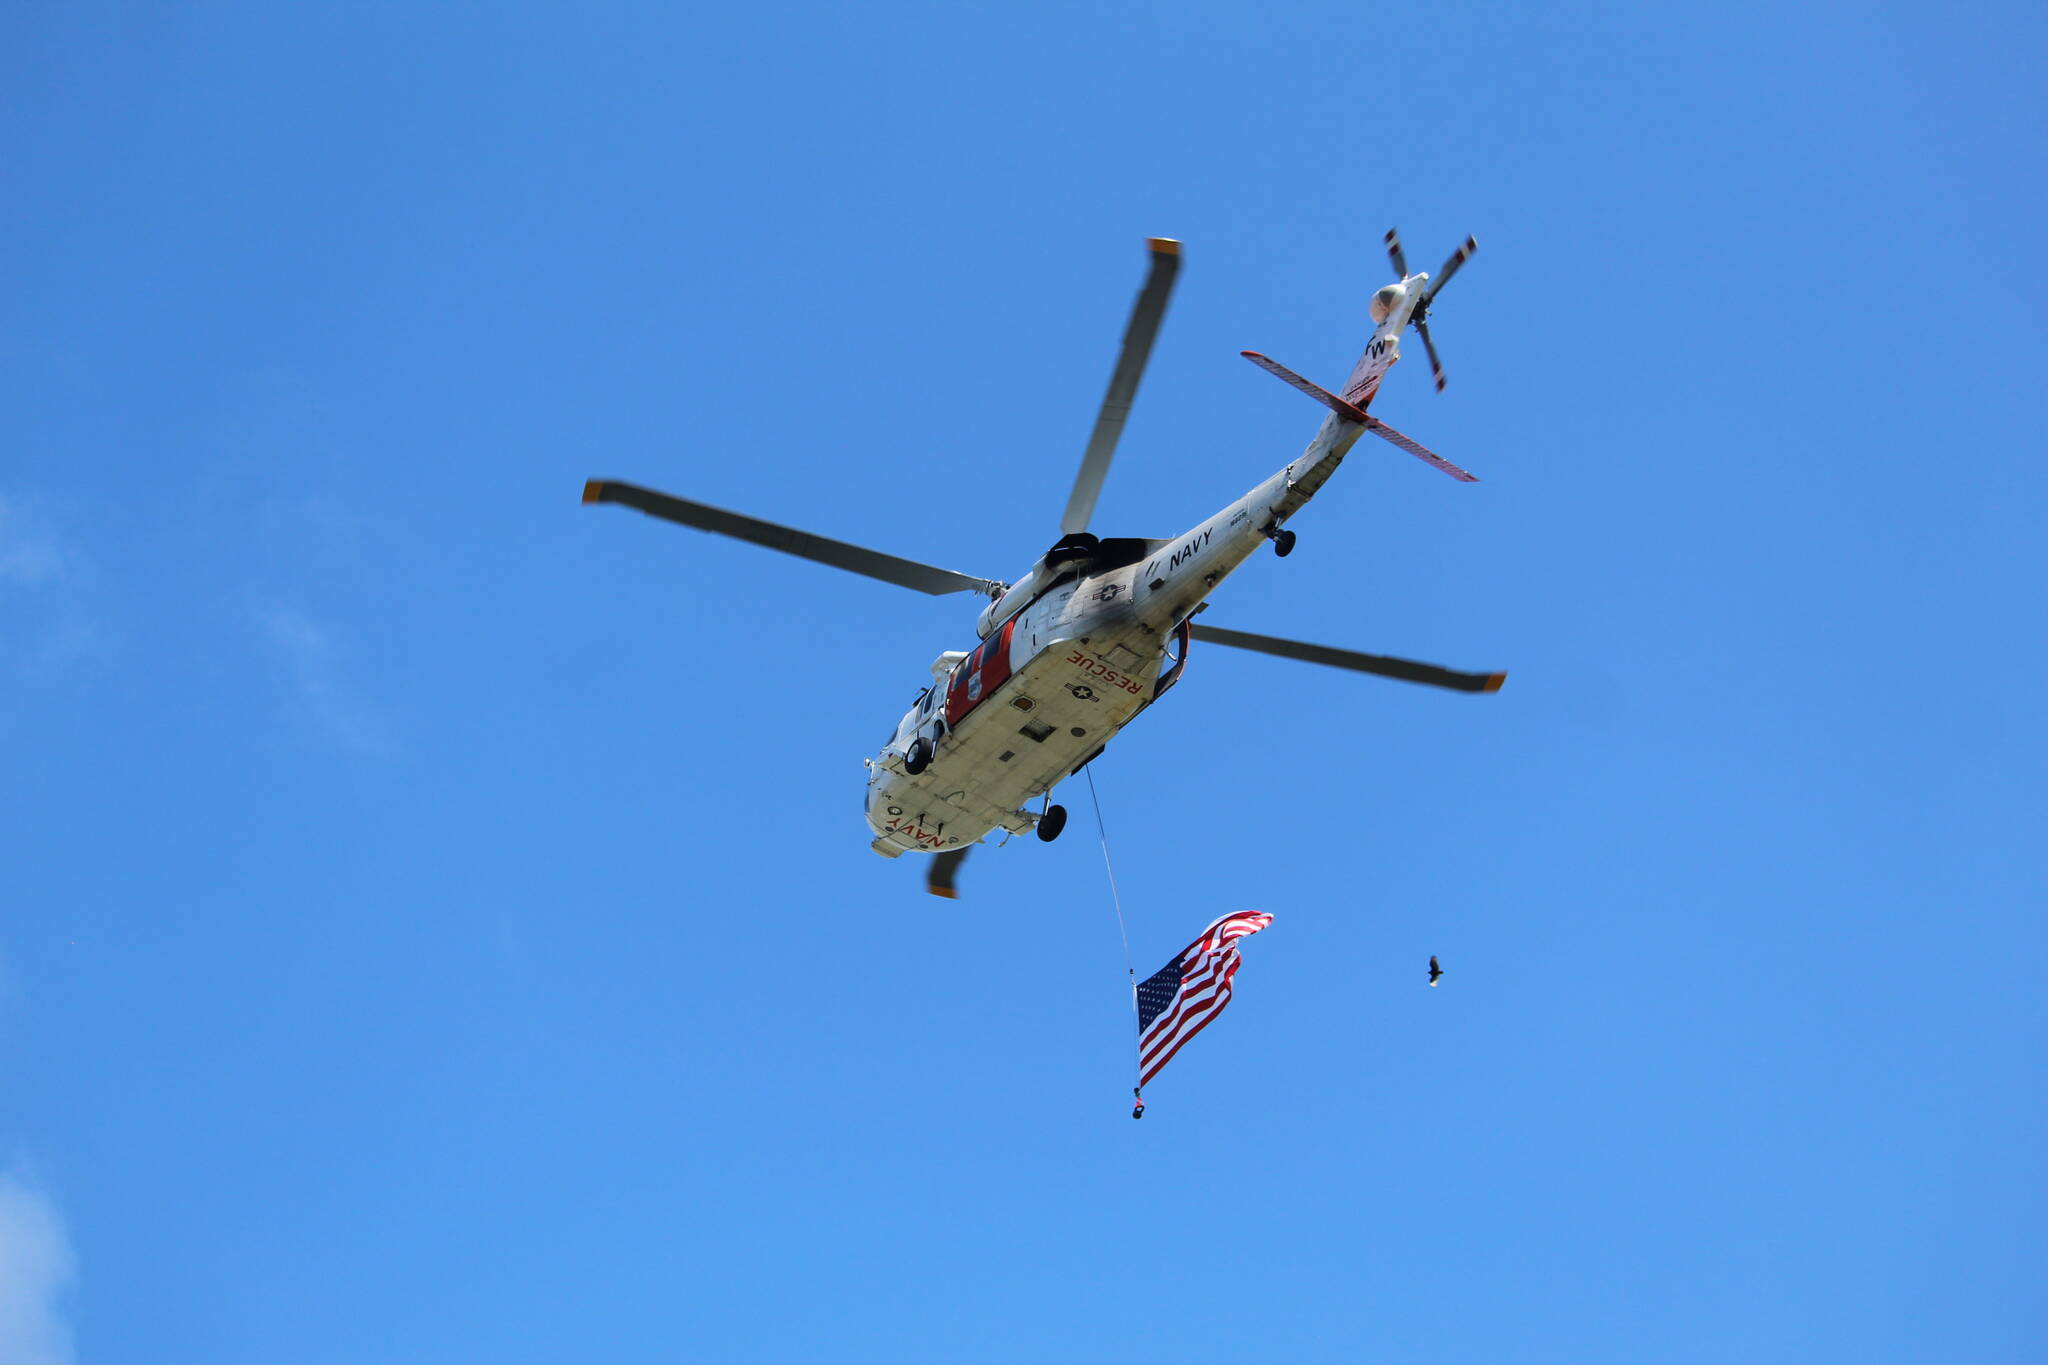 Photo by Karina Andrew/Whidbey News-Times
An NAS Whidbey Island Search and Rescue helicopter executes a flyover at the conclusion of the Service of Remembrance on Memorial Day.